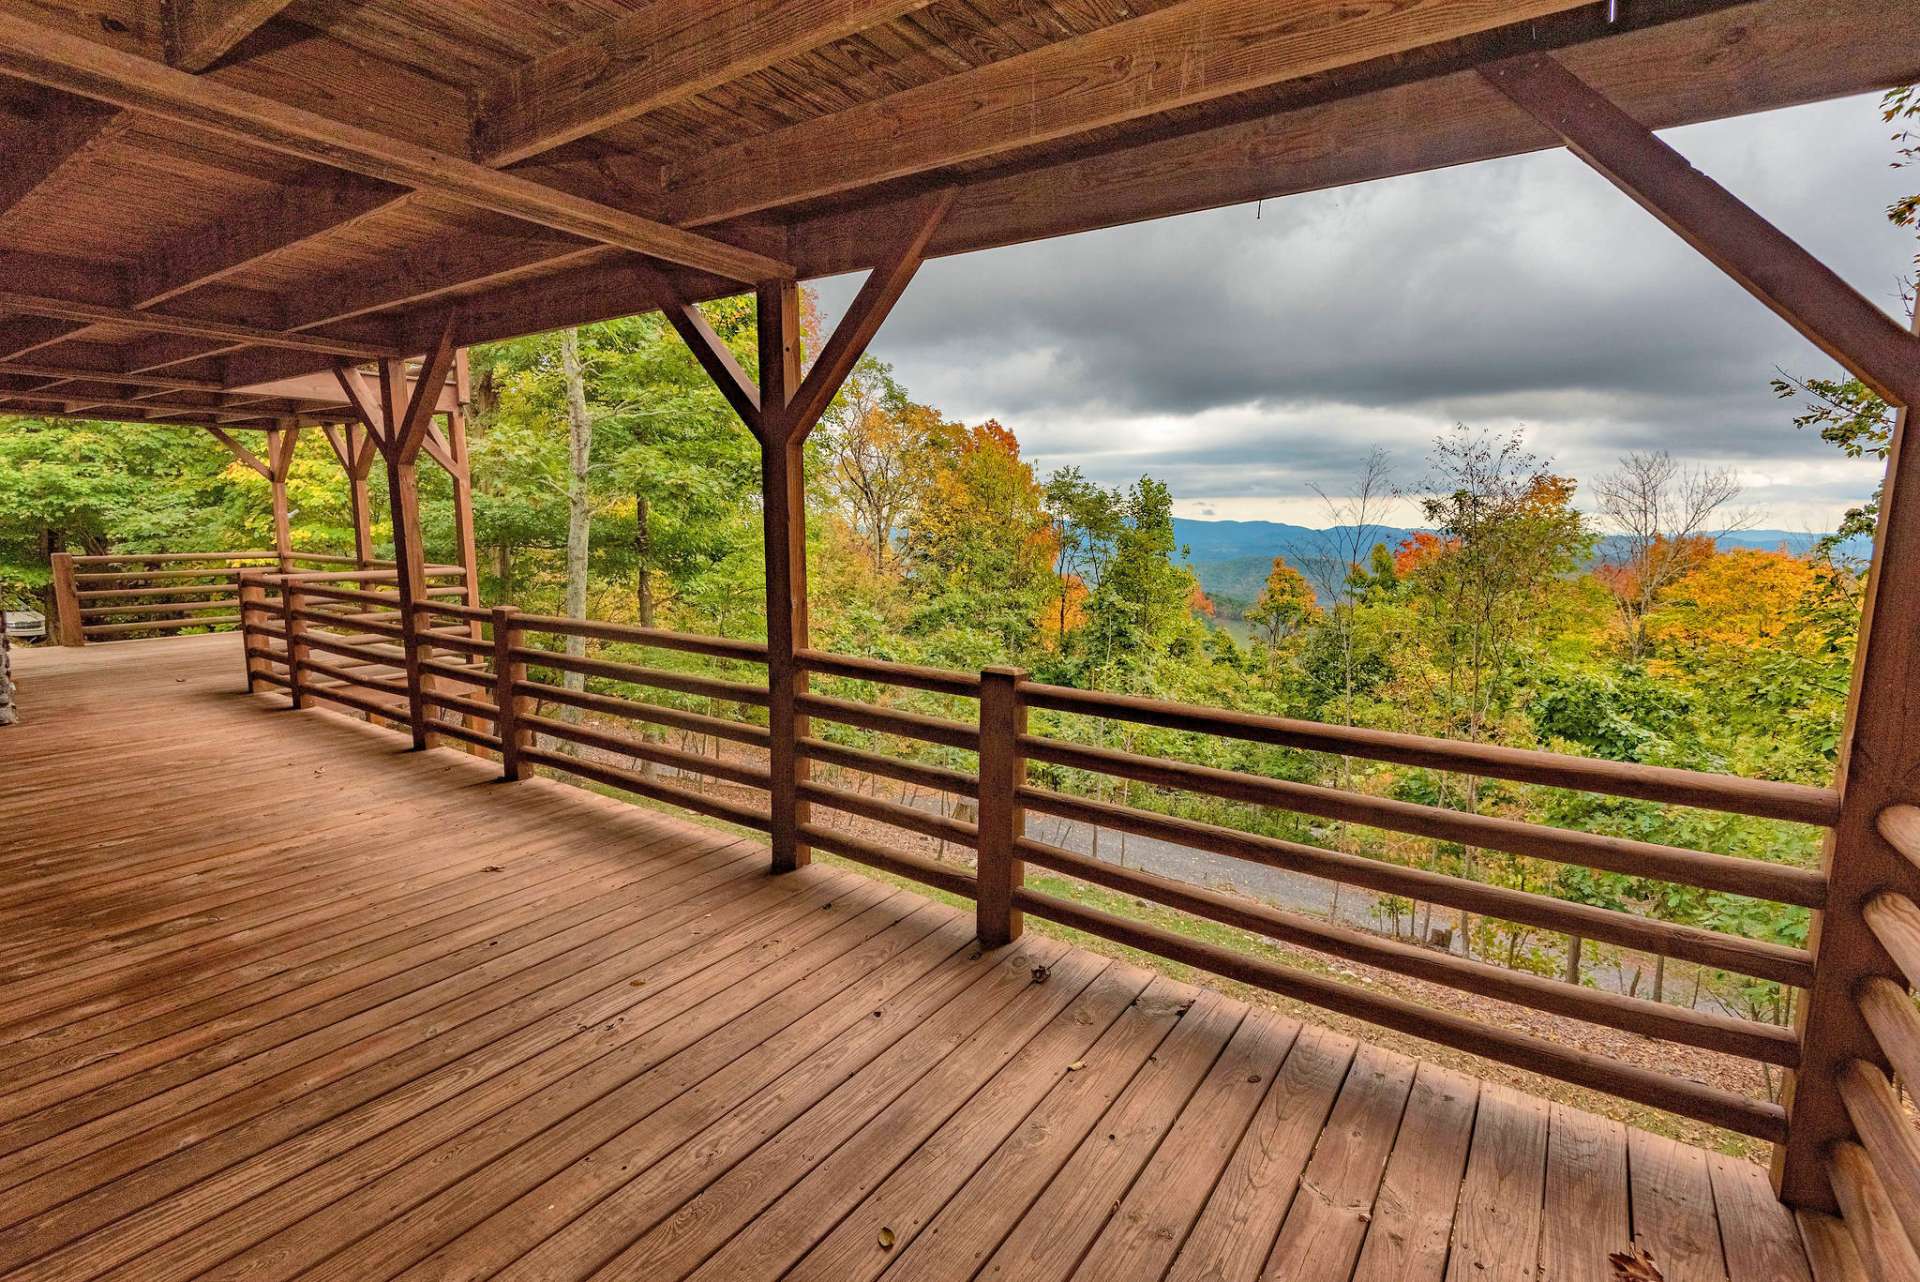 If you love the outdoors, you will love these decks!